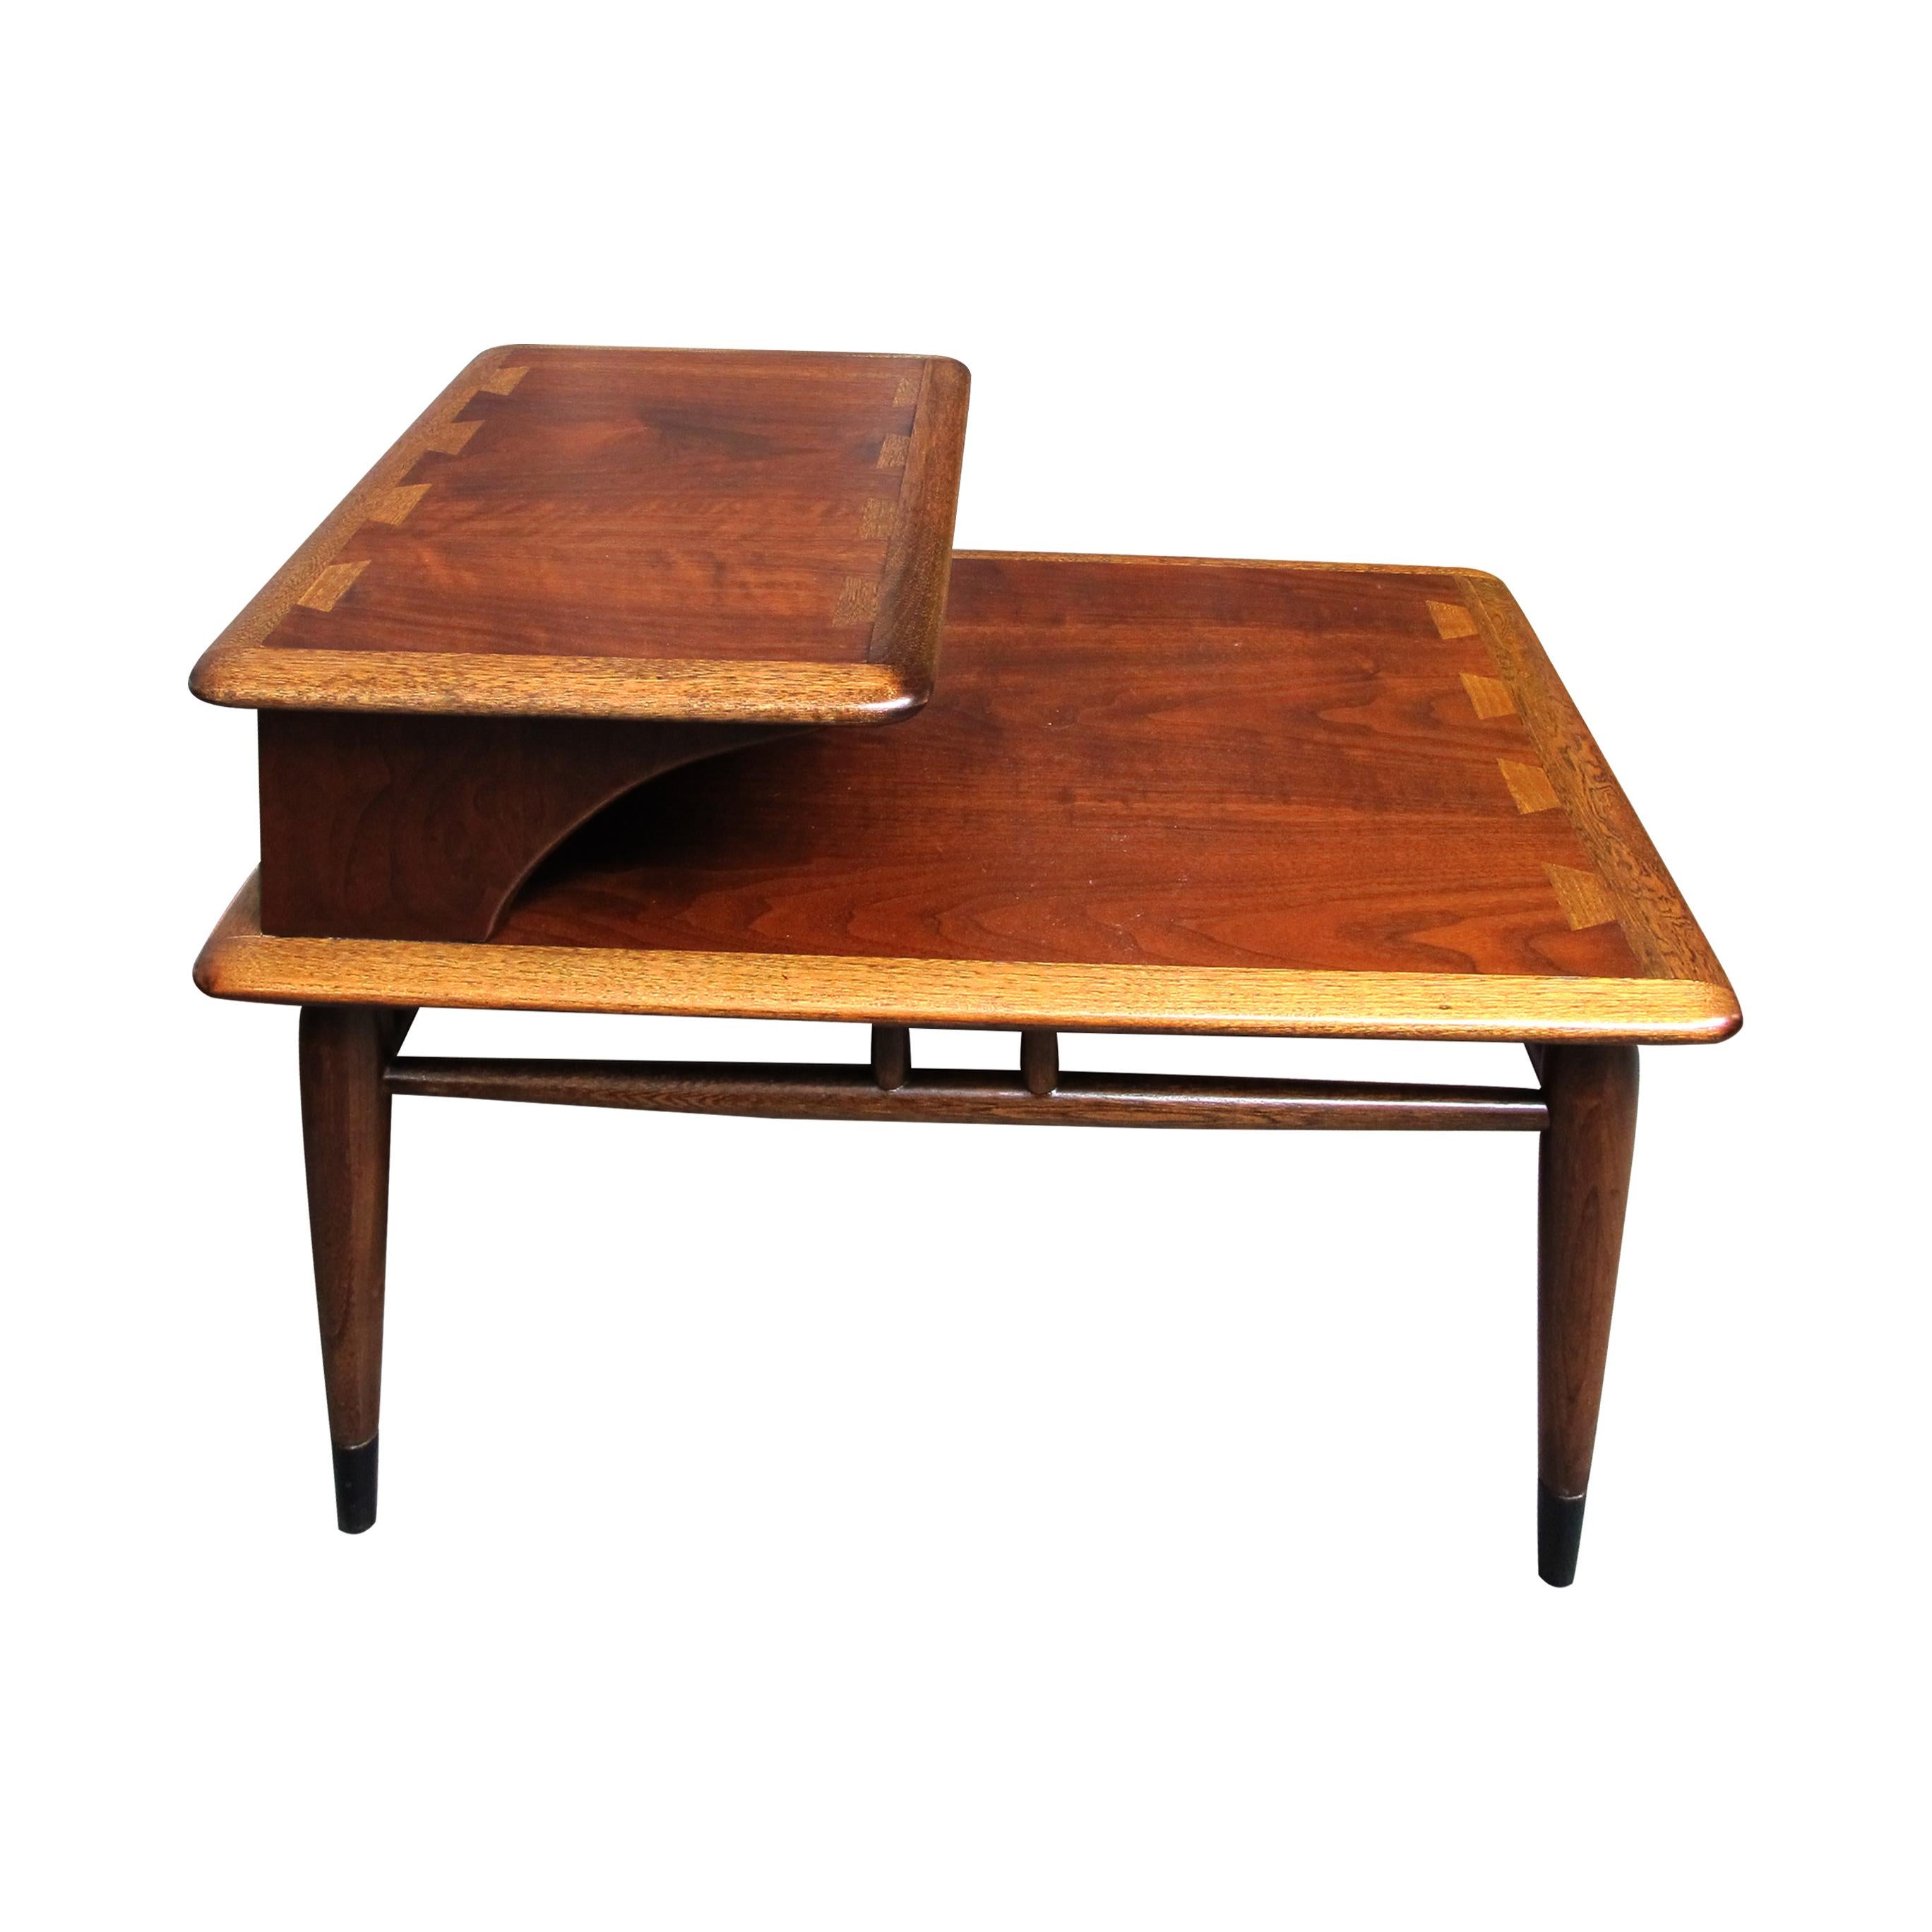 Mid-20th Century 1960s Pair of Modernist Two Tiers Walnut Side Tables, American by LANE